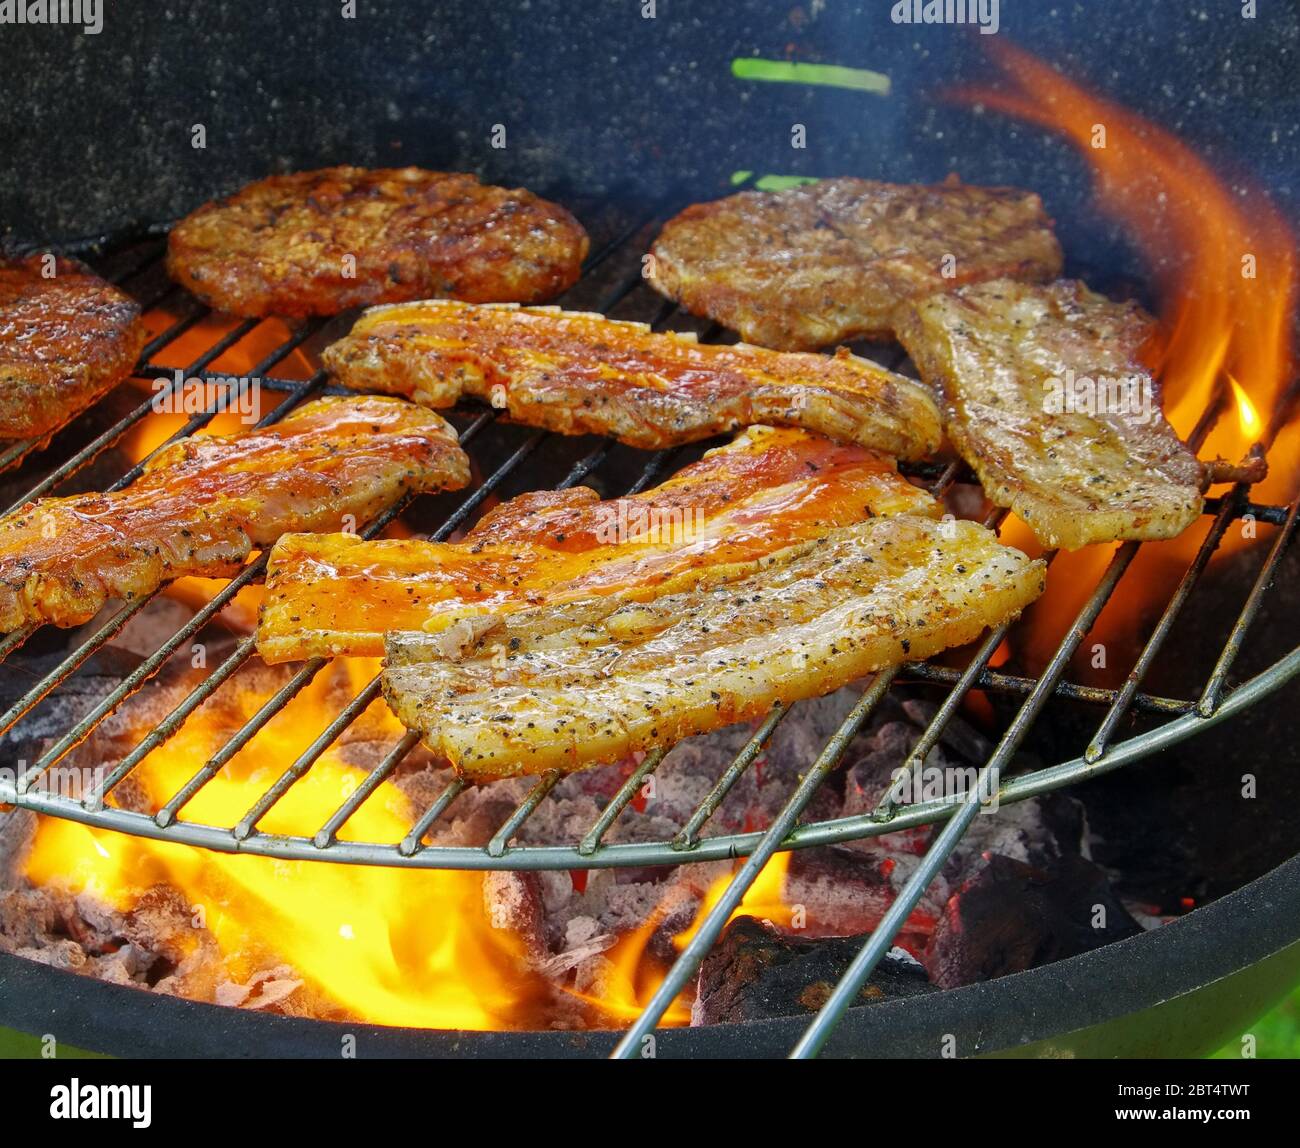 rust, grill, barbecue, barbeque, steak, pig, meat, boil, cooks, boiling, Stock Photo